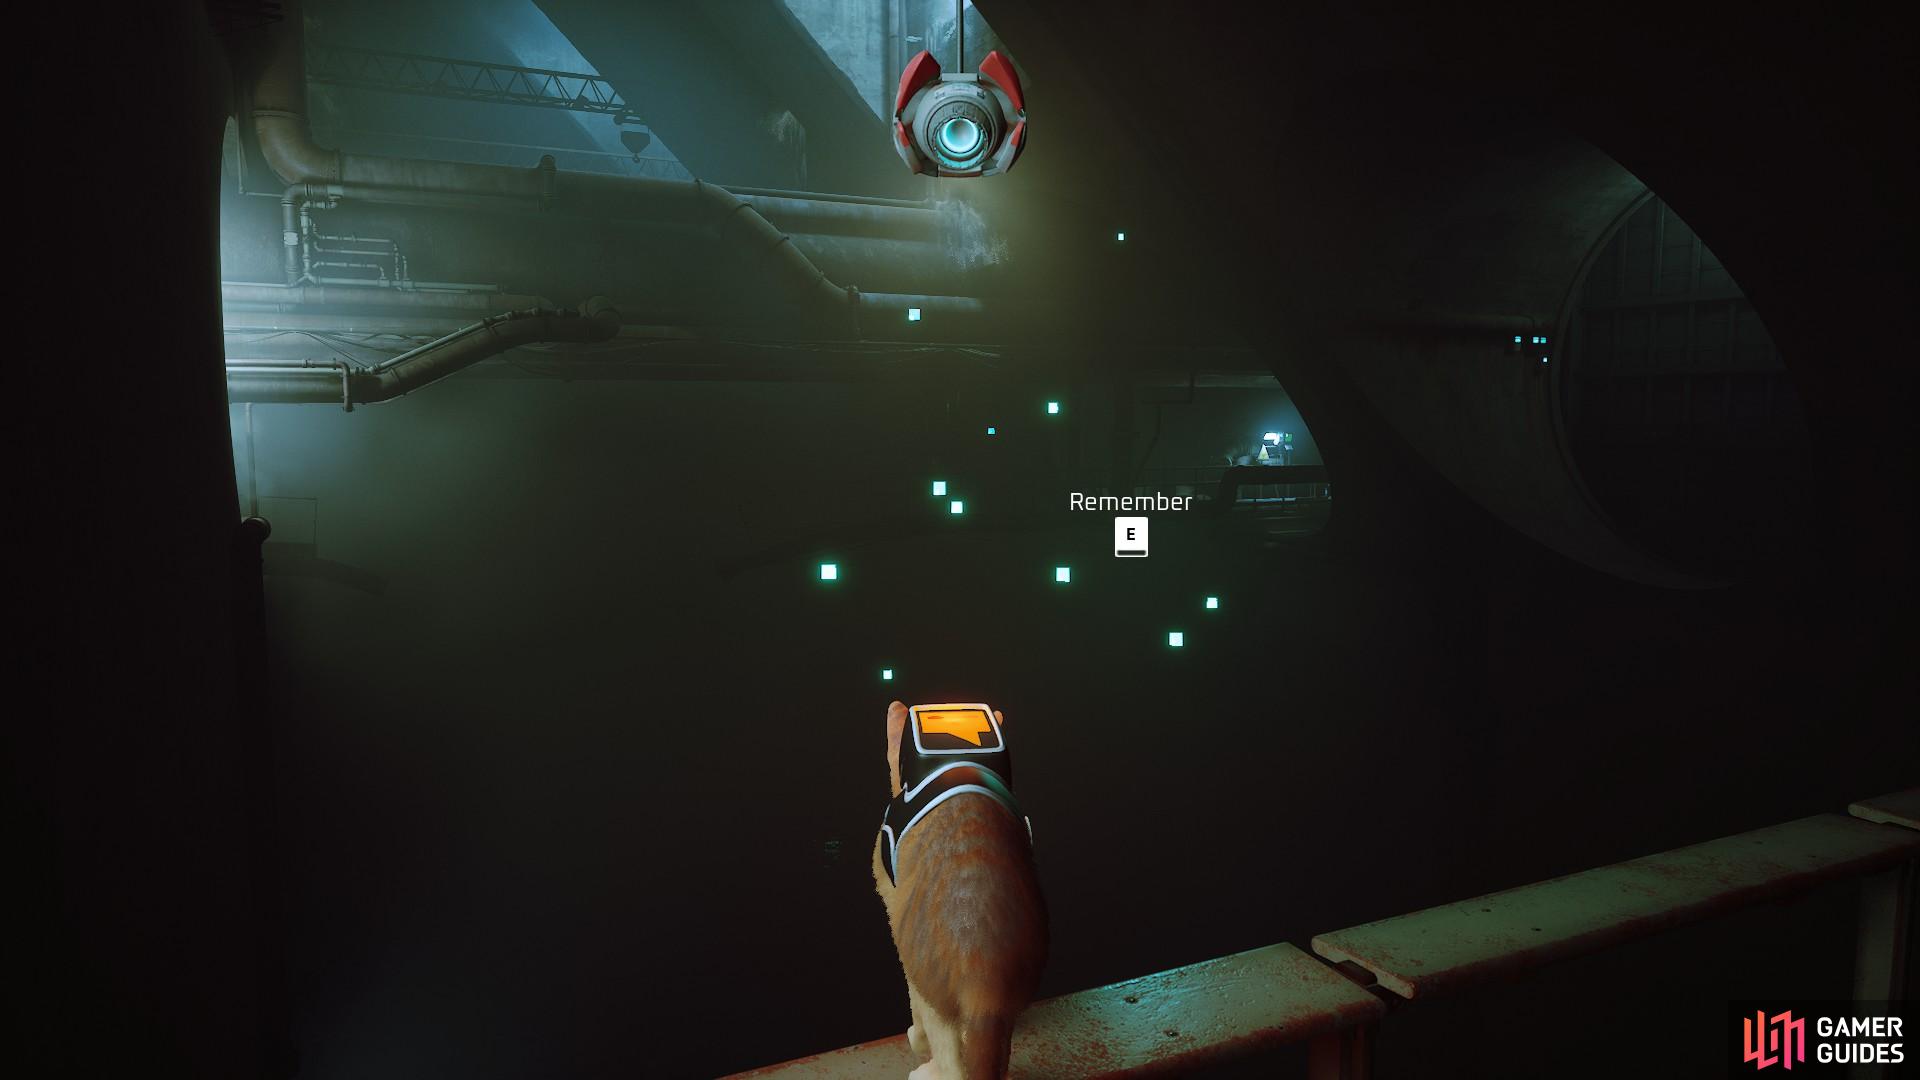 Once you’re through the tunnel, jump on the ledge and get the first memory of the Sewers level.